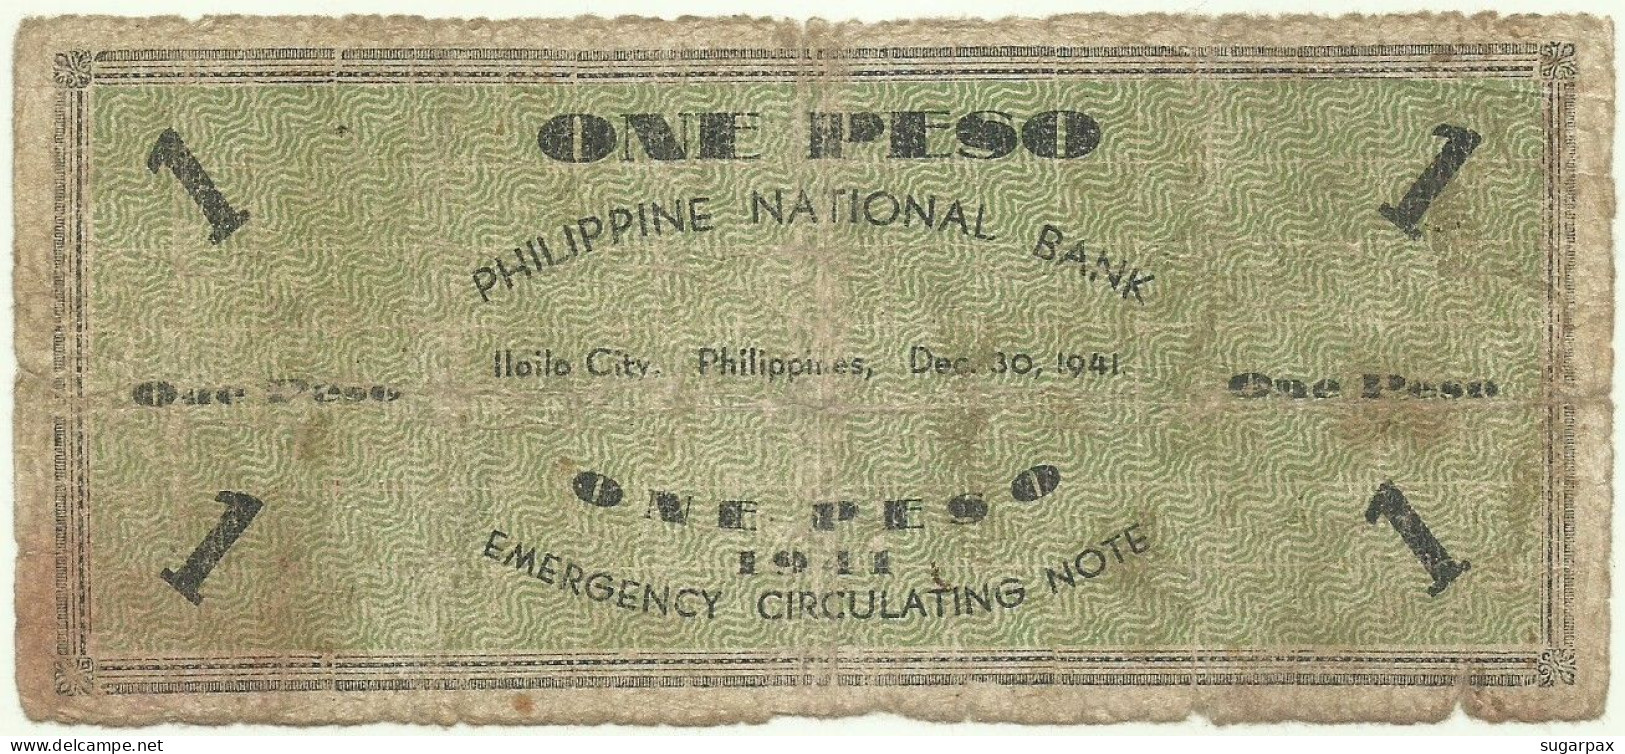 PHILIPPINES - 1 Peso - 1941 - Pick S 305 - Serie A6 - ILOILO Currency Committee - Philippinen